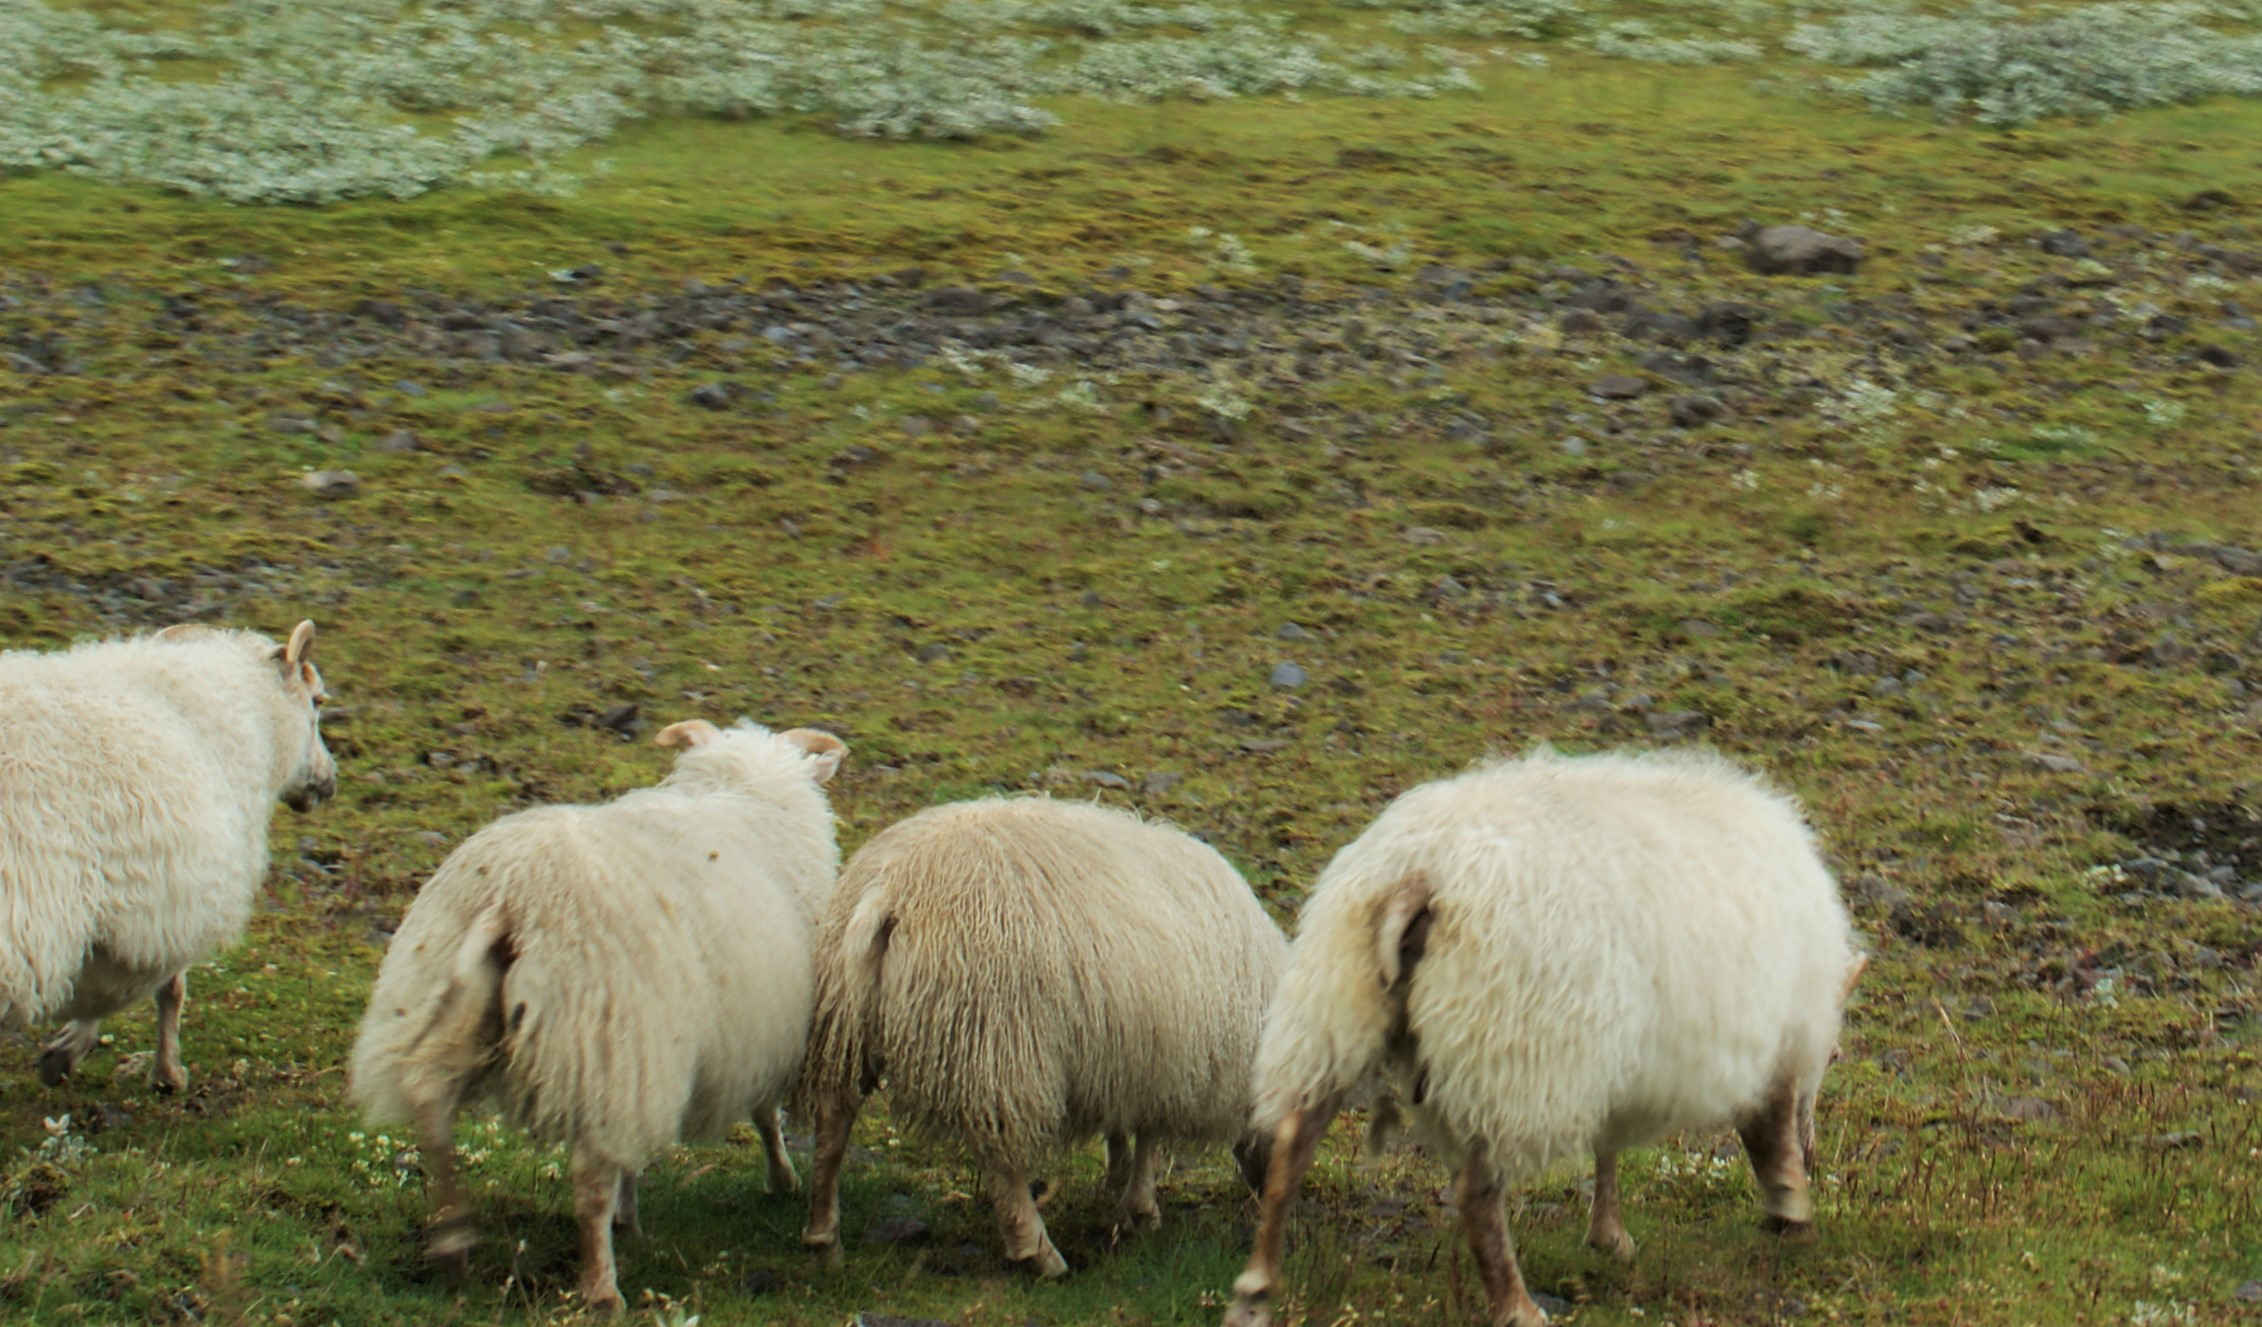 Sheep butts